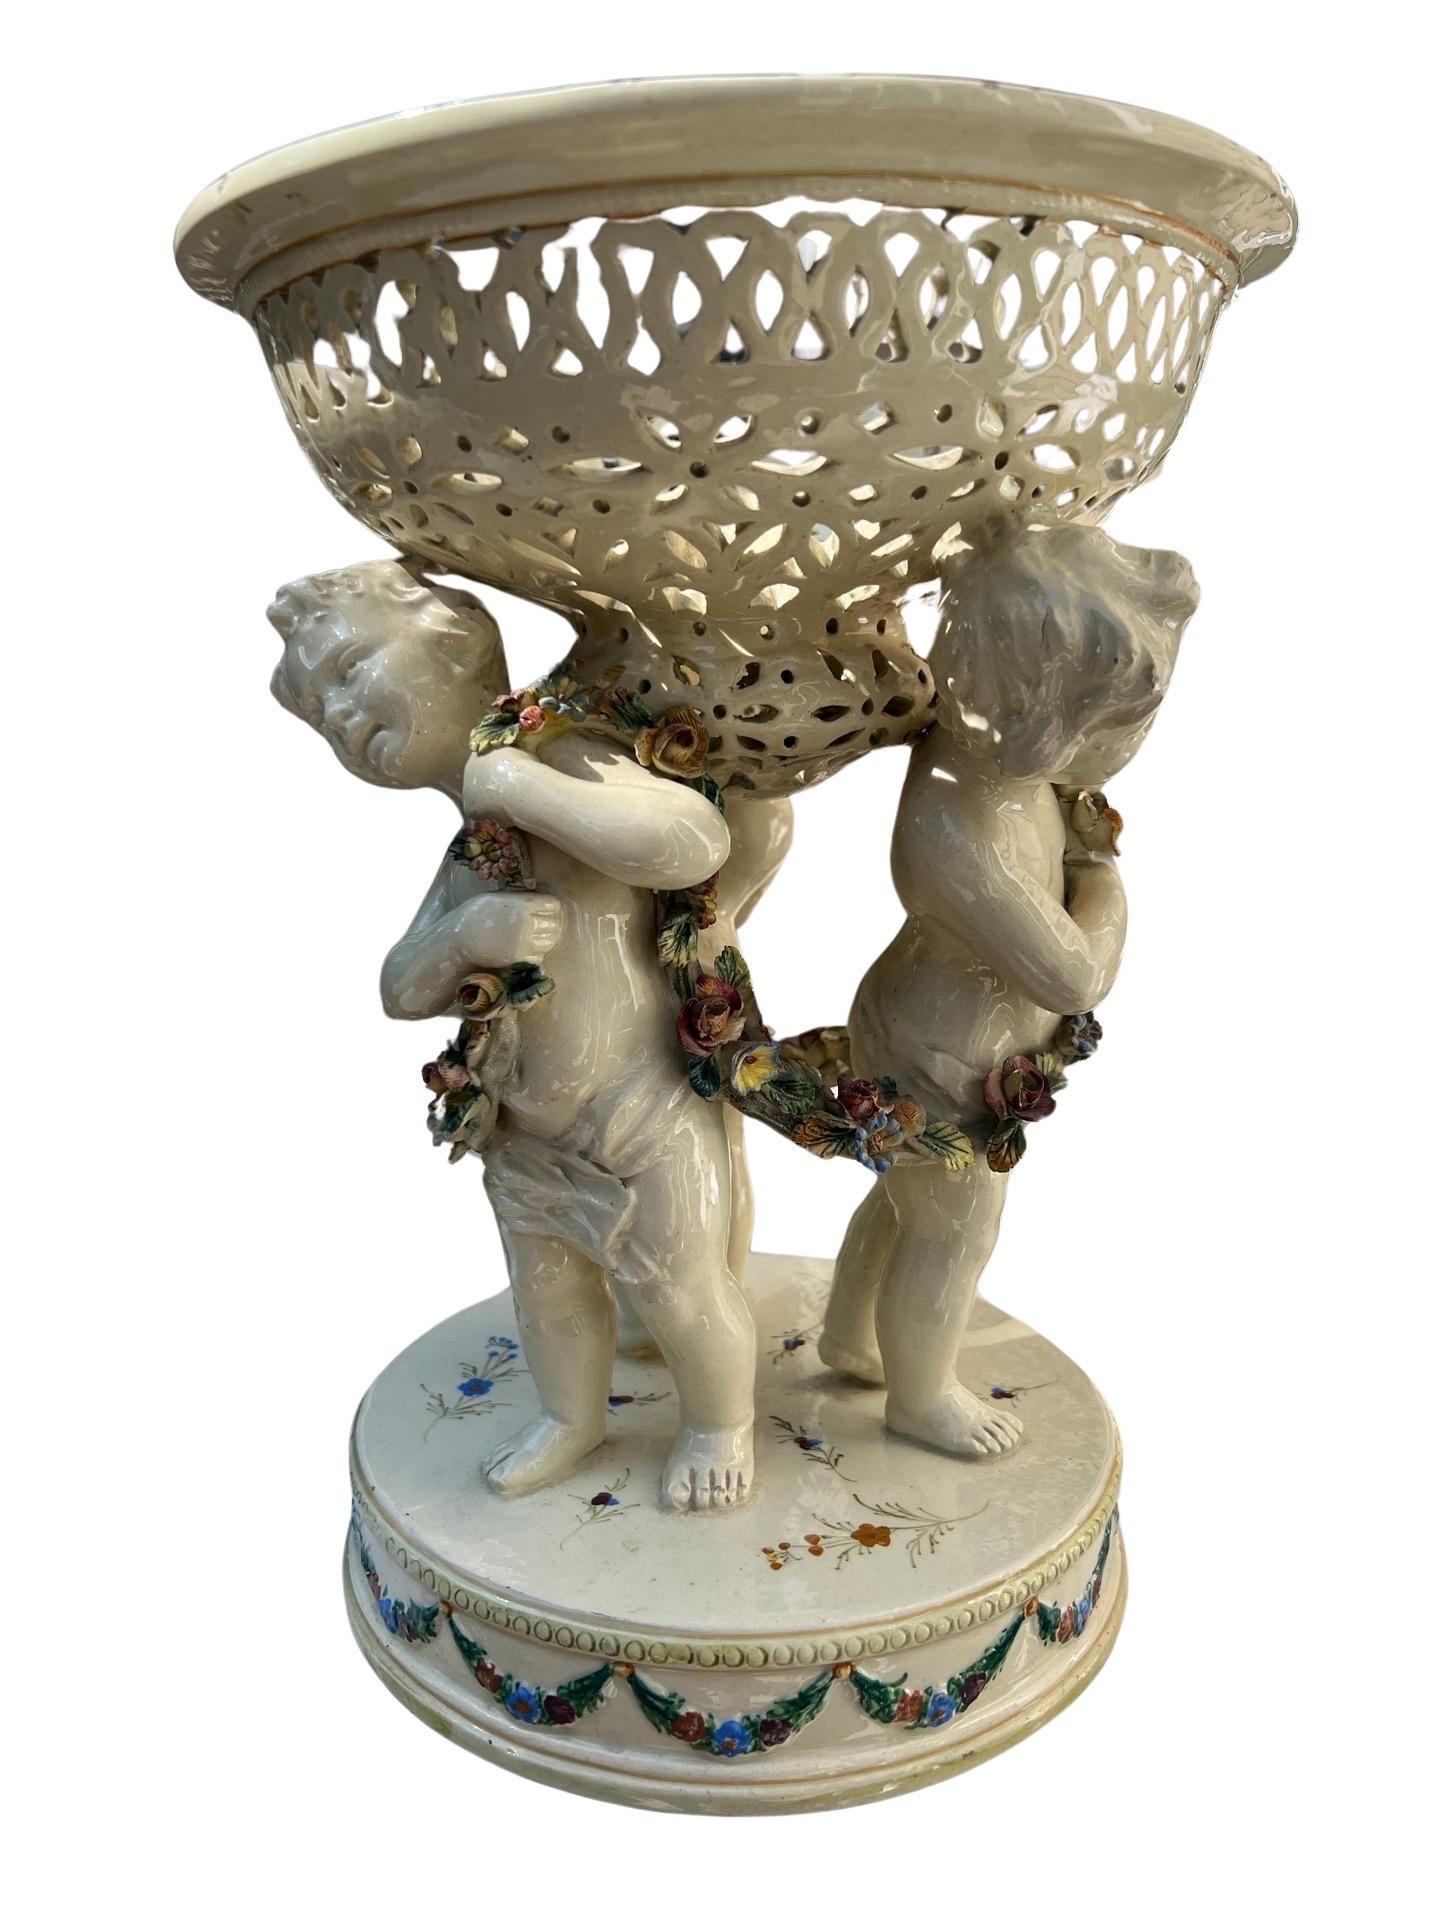 19th Century French Tin Glazed Creamware Centerpiece Adorned With Putti Supports In Good Condition For Sale In Atlanta, GA